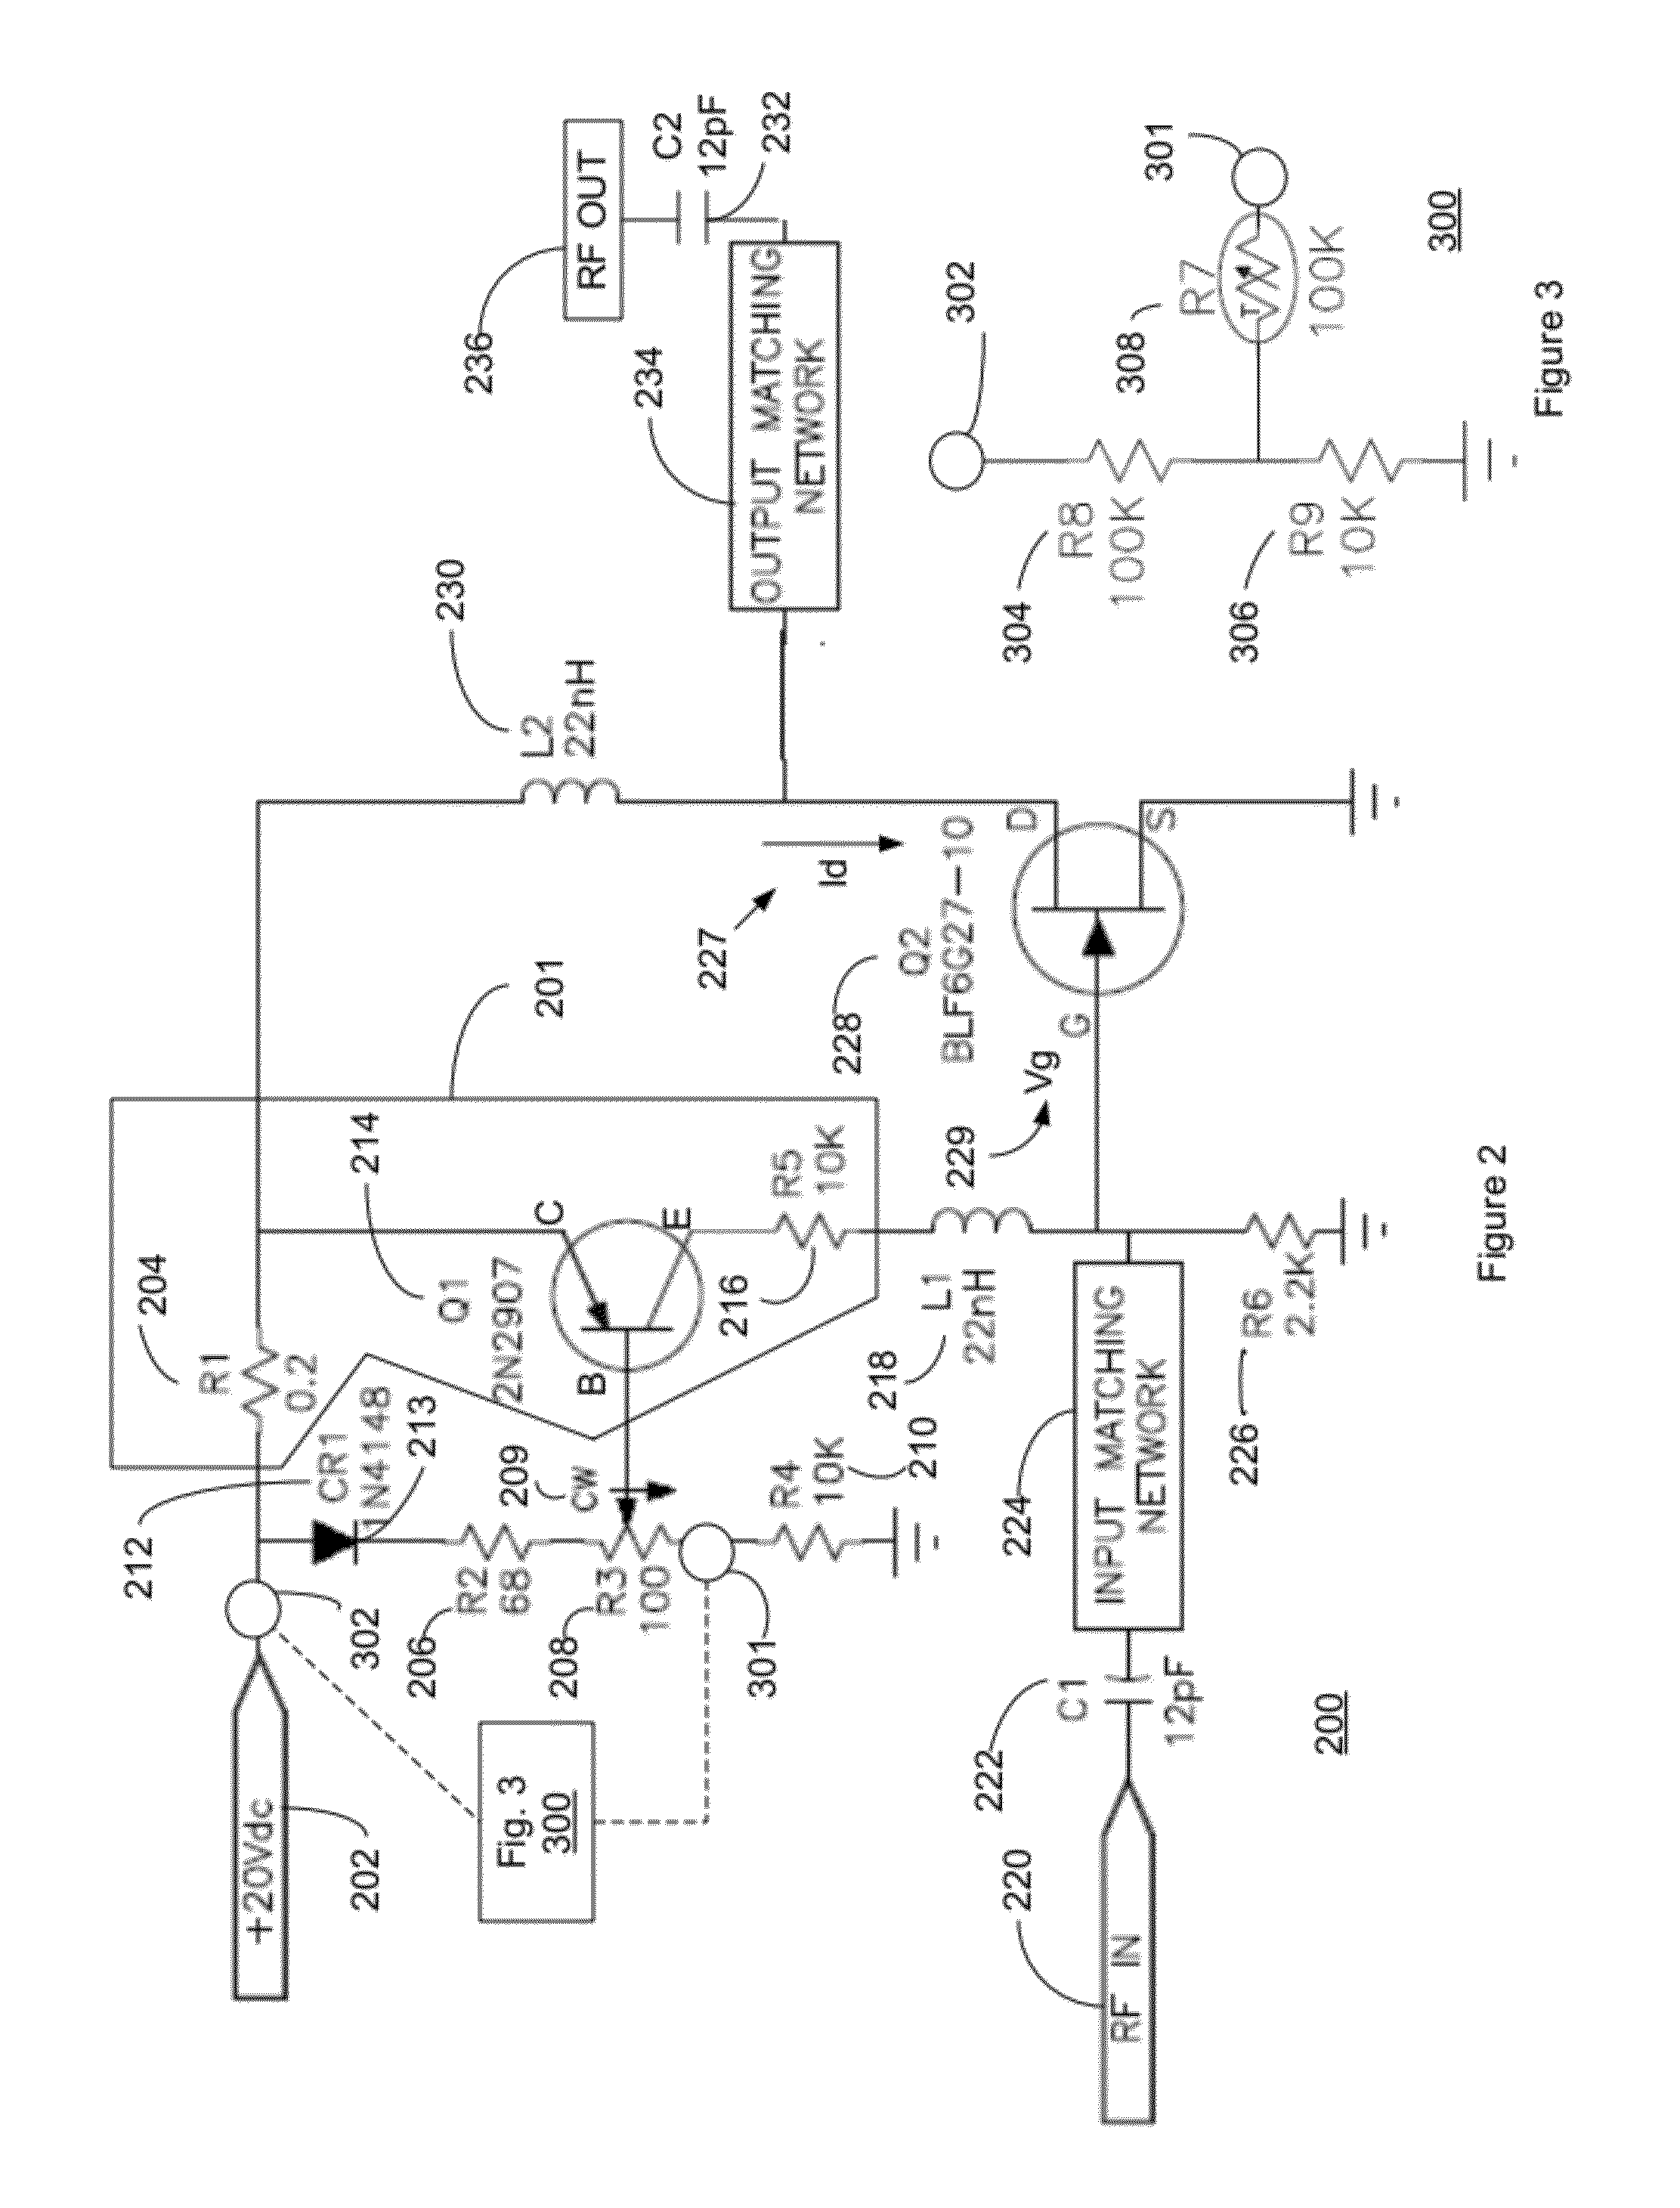 Method and system for providing automatic gate bias and bias sequencing for field effect transistors